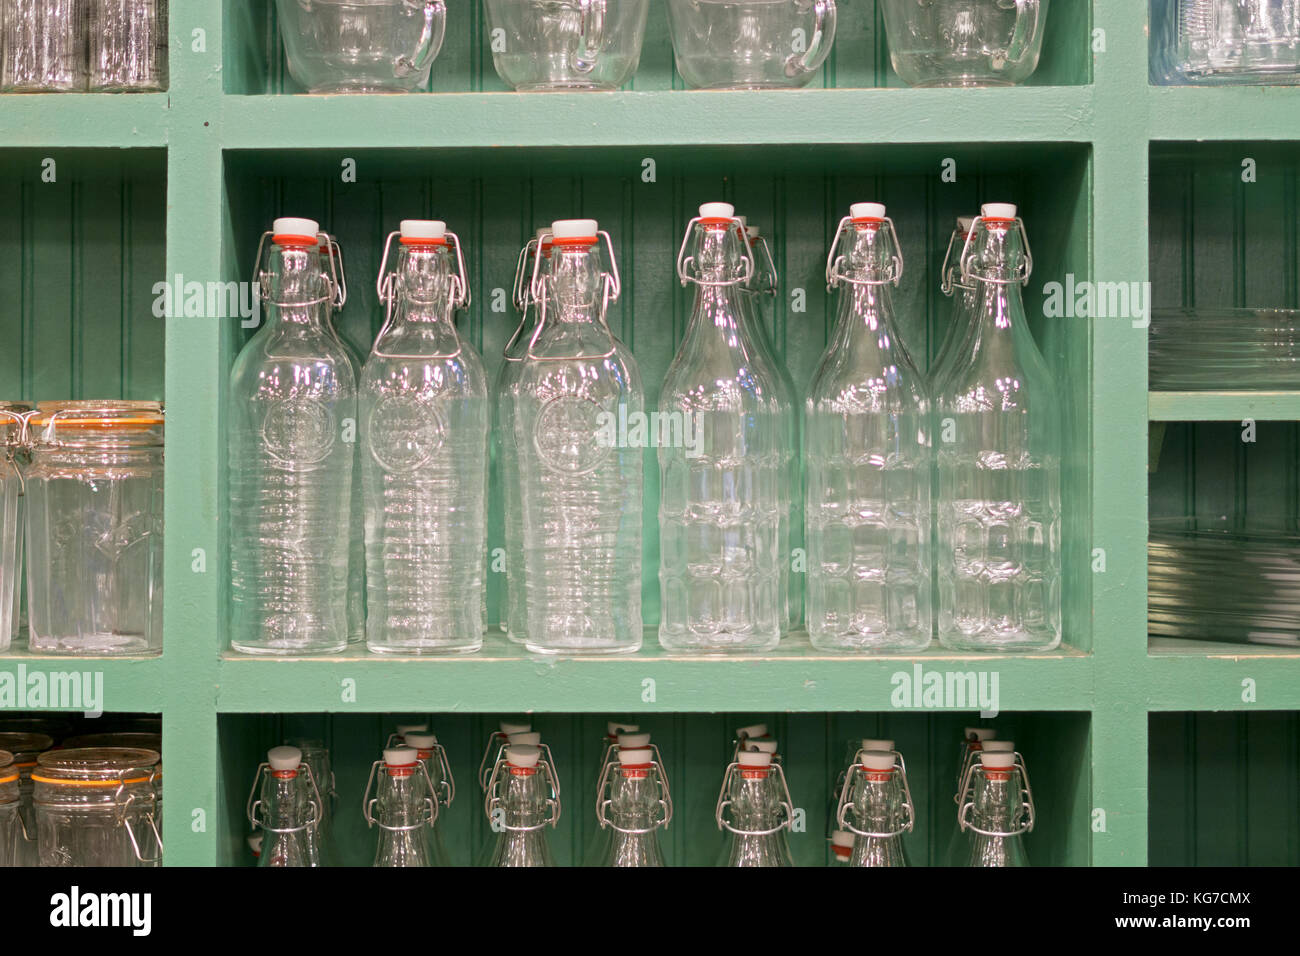 A display of glass storage bottles on shelves in Fish's Eddy on Broadway in lower Manhattan, New York City. Stock Photo